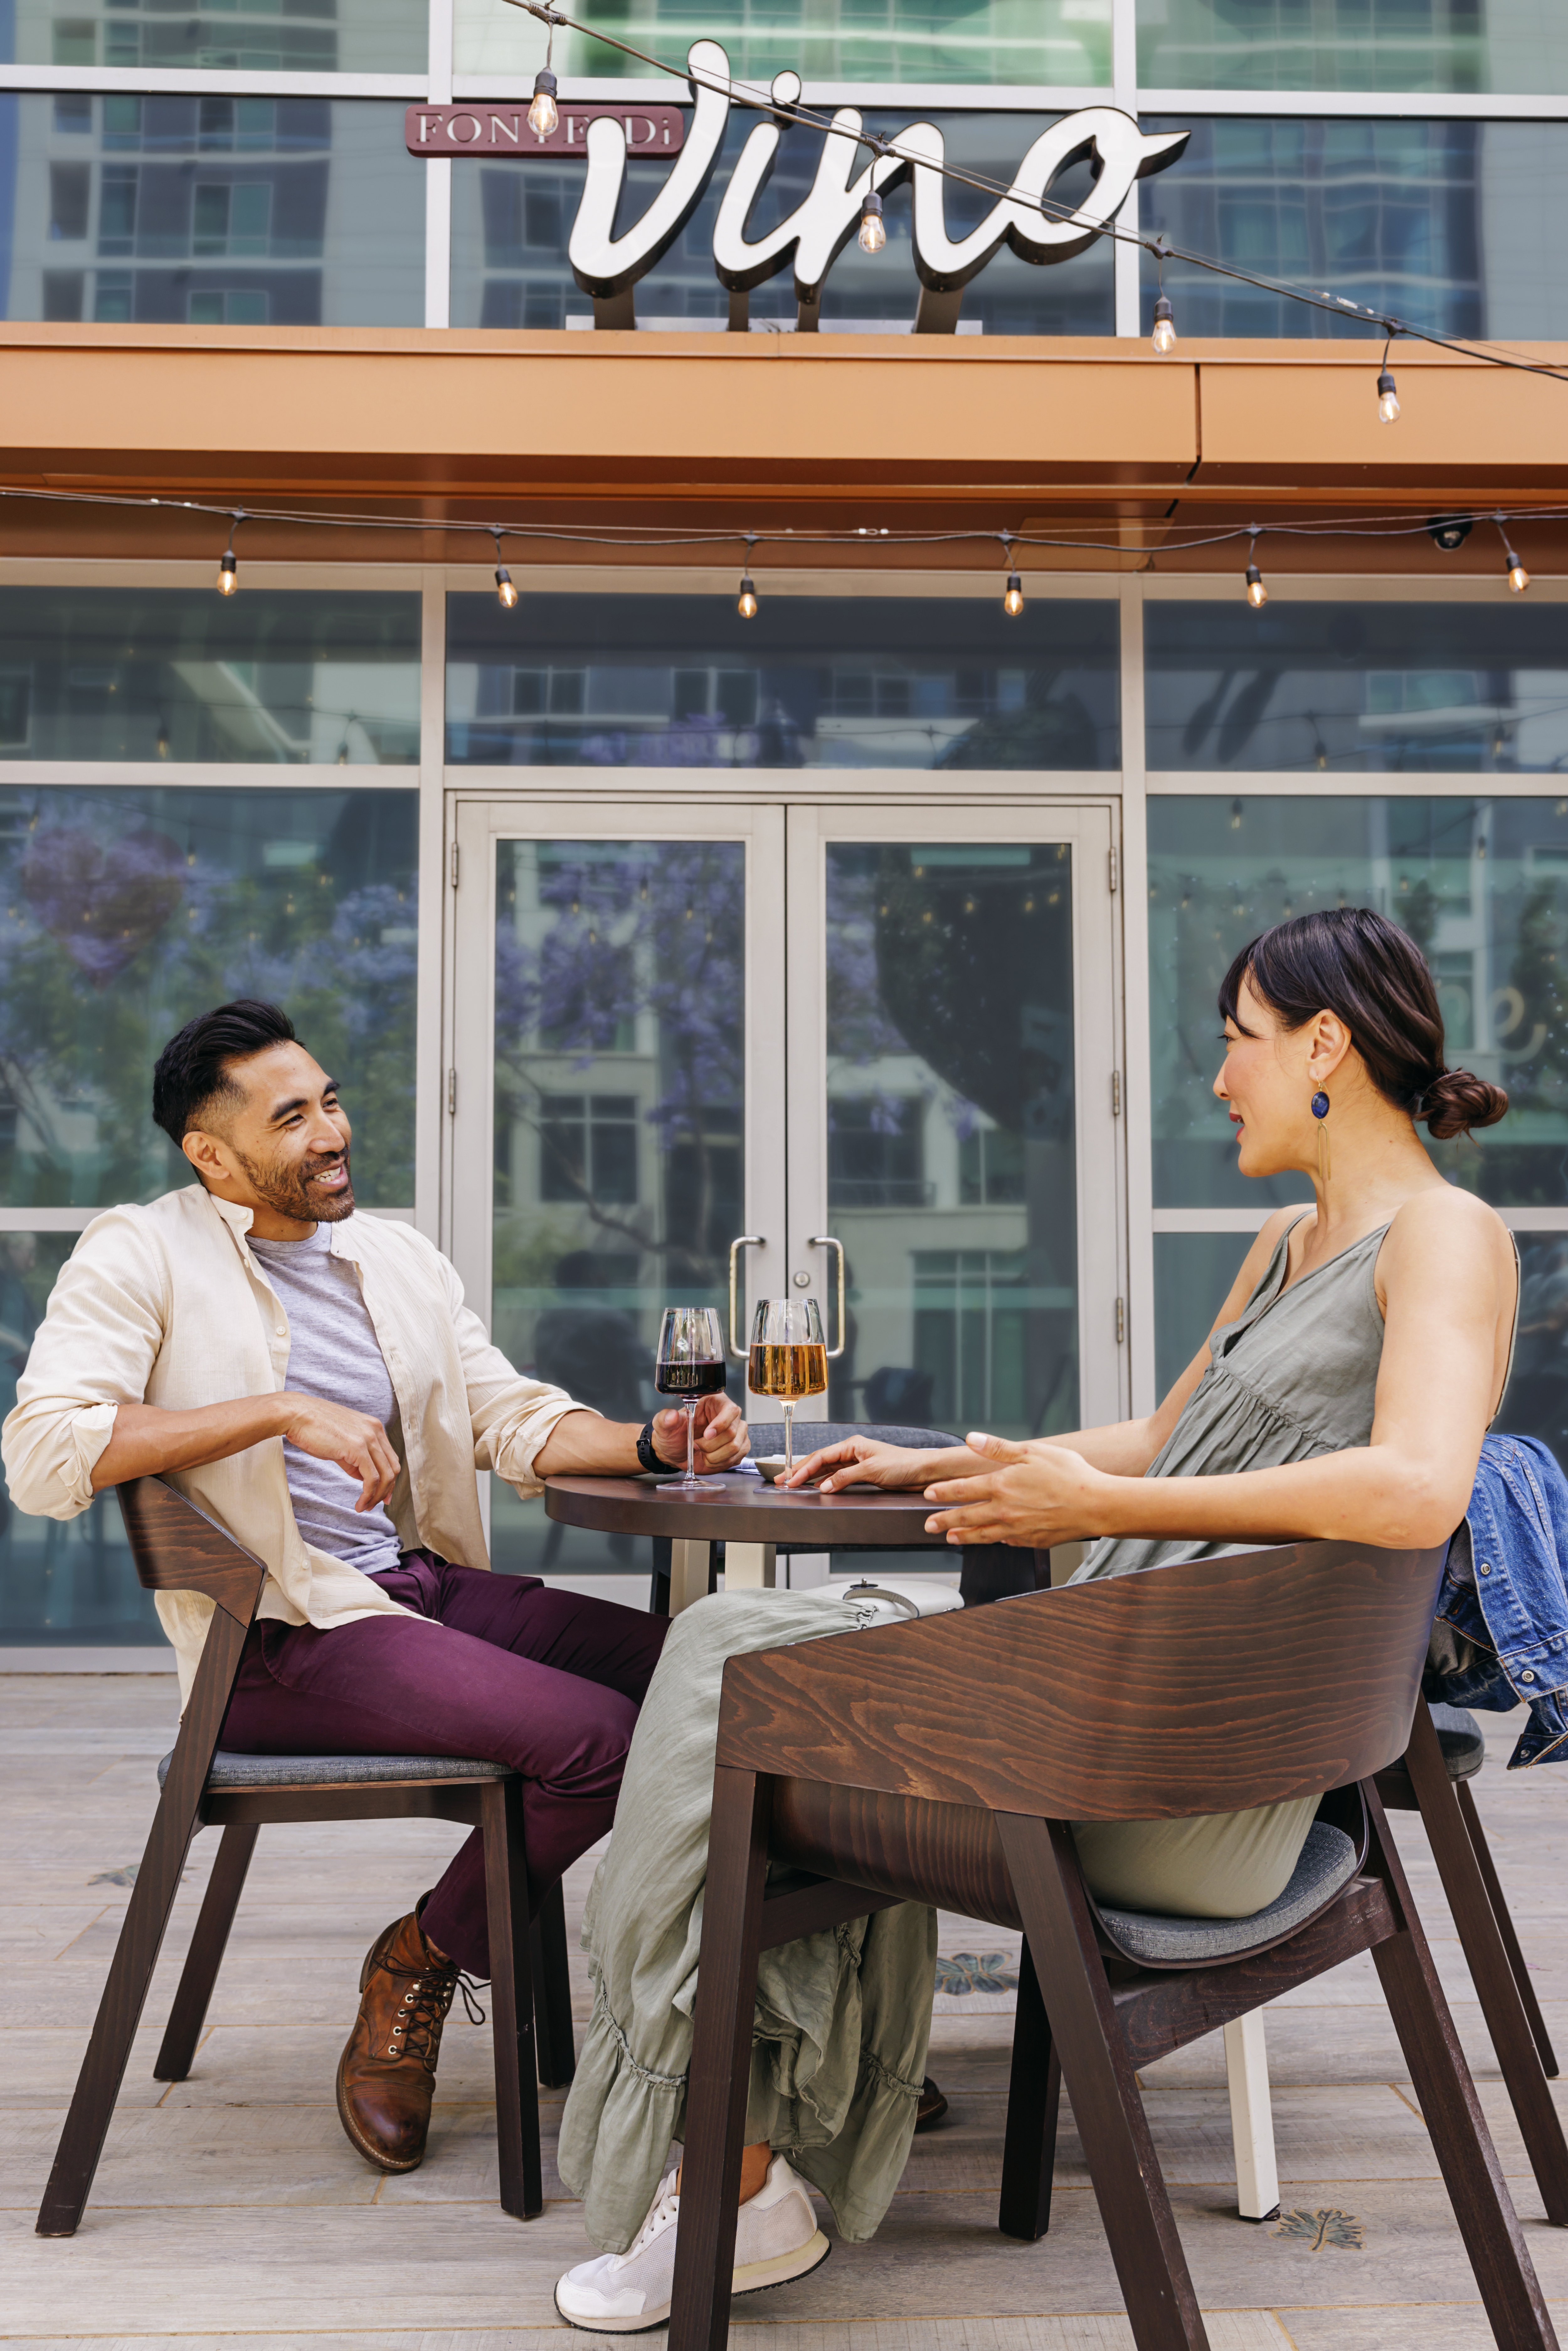 Man and woman sitting outside restaurant